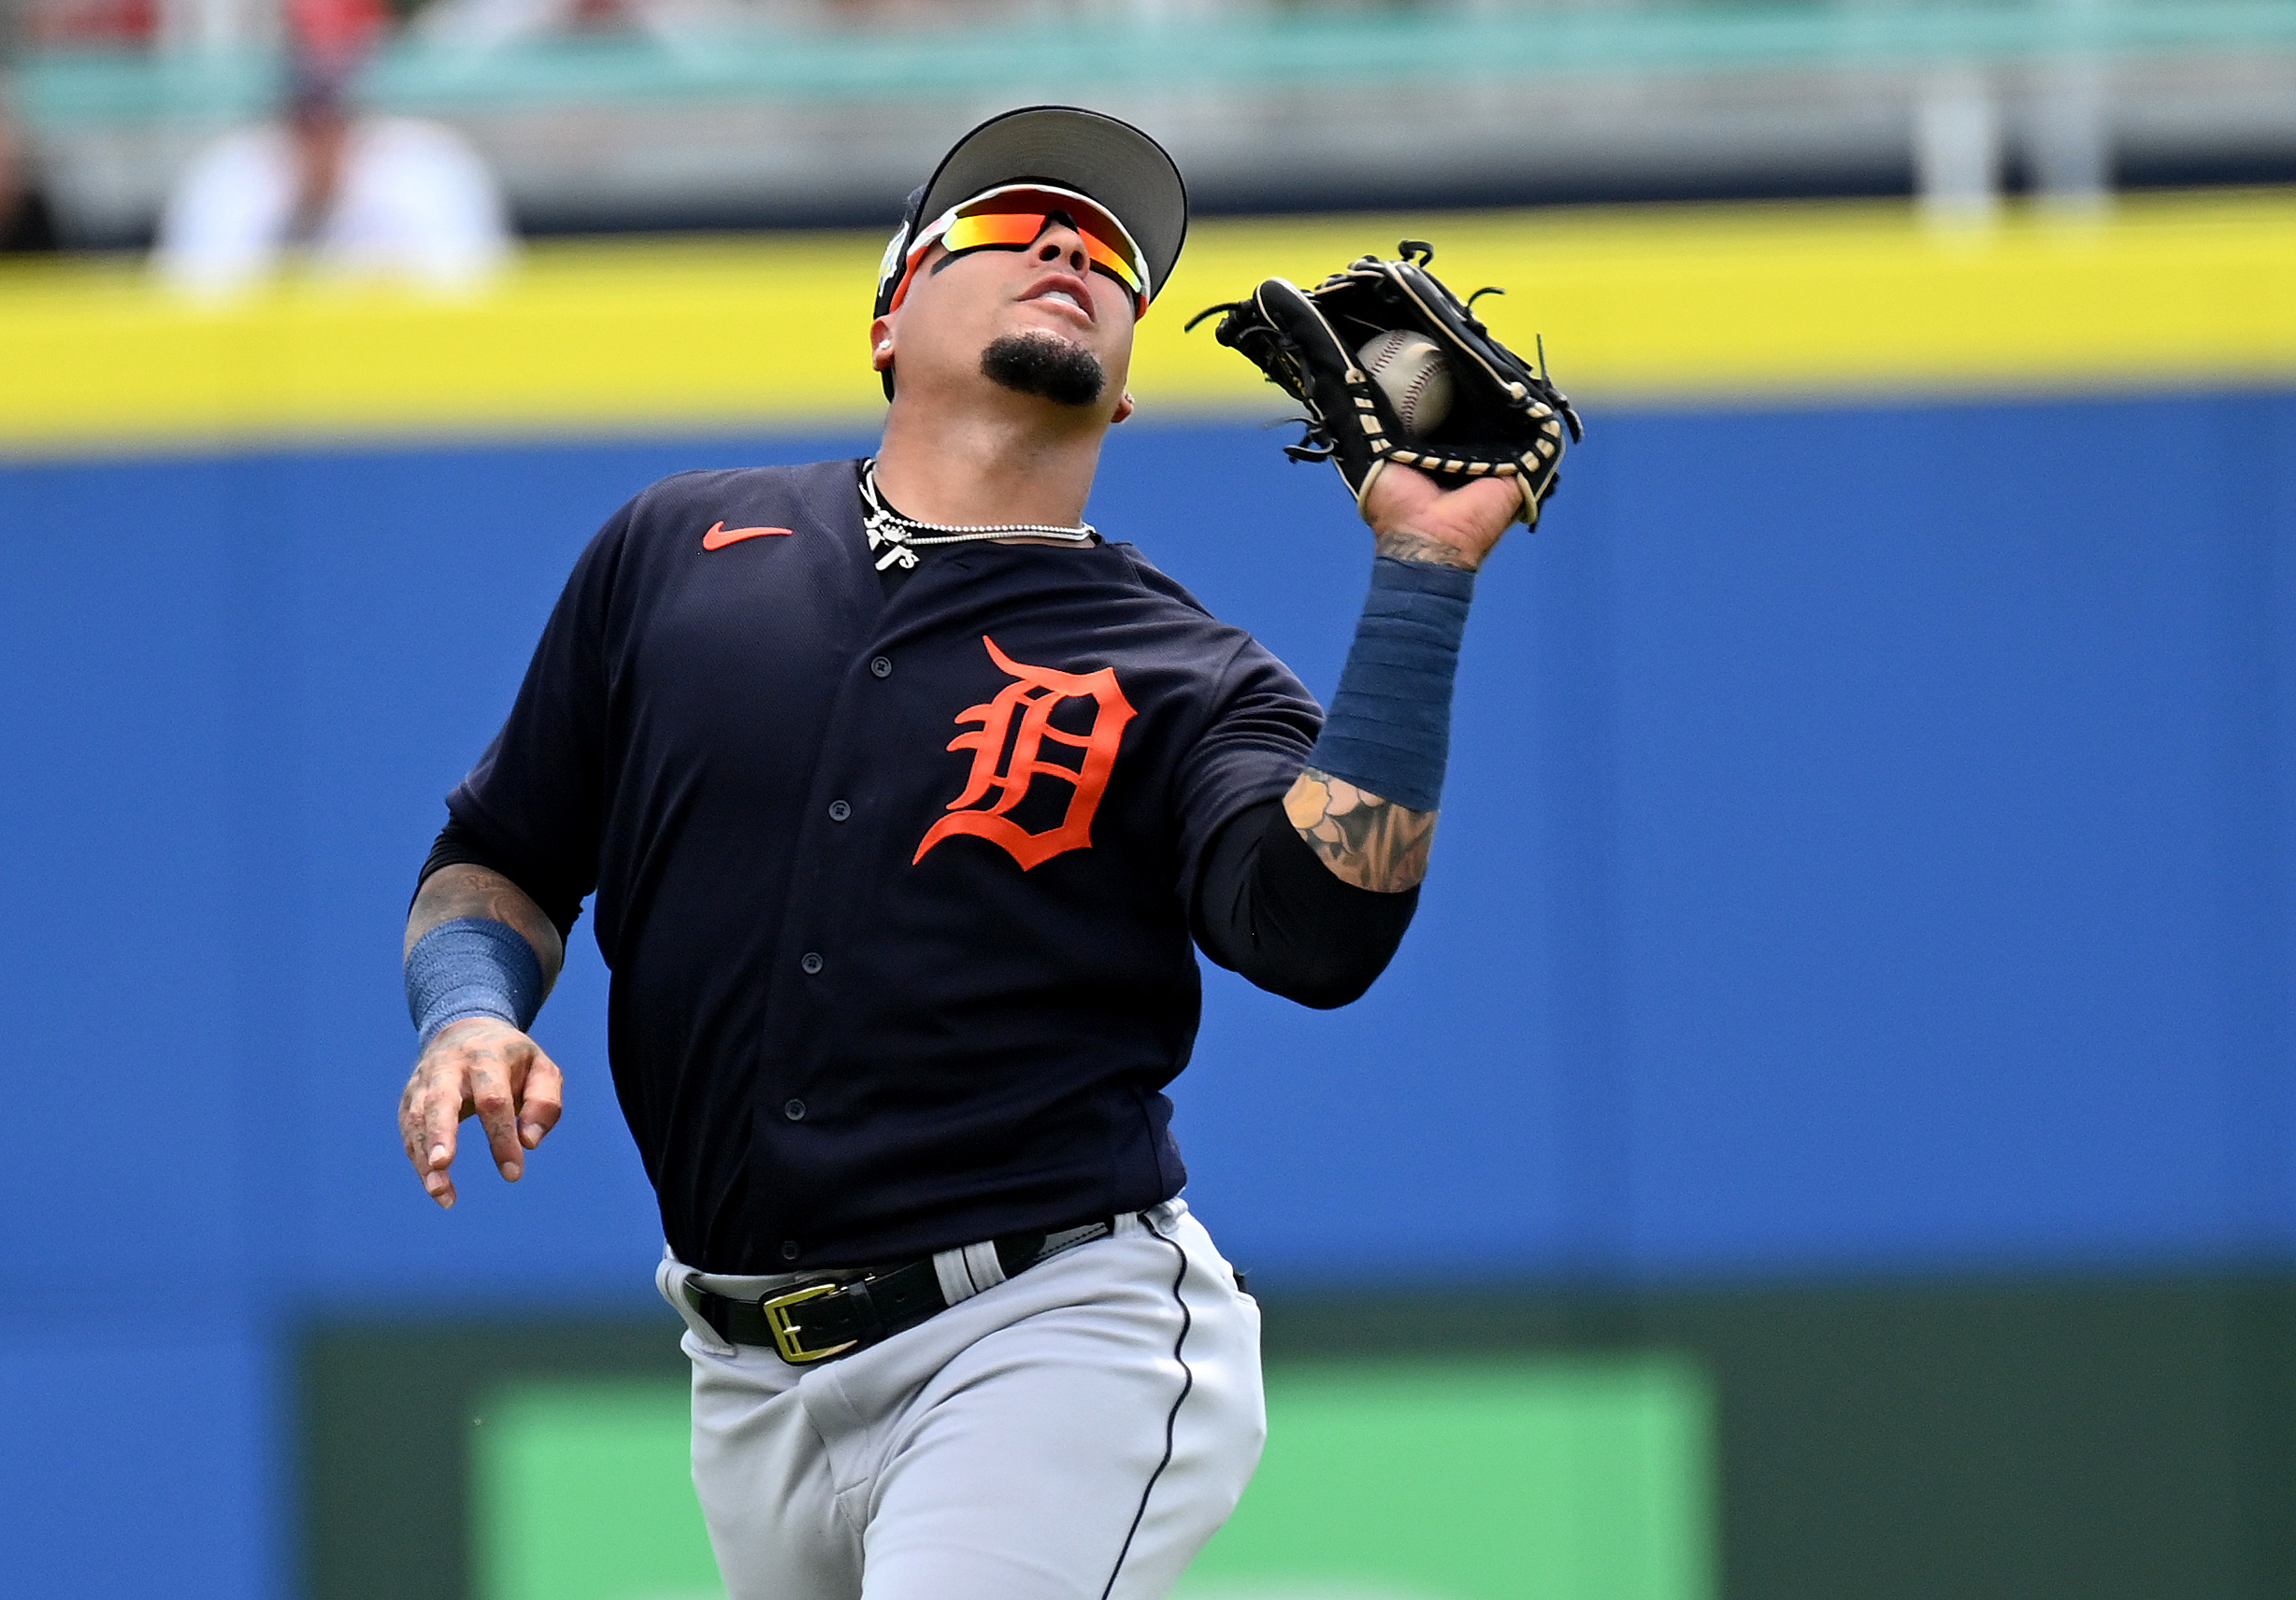 2022 Detroit Tigers Predictions and Odds to Win the World Series